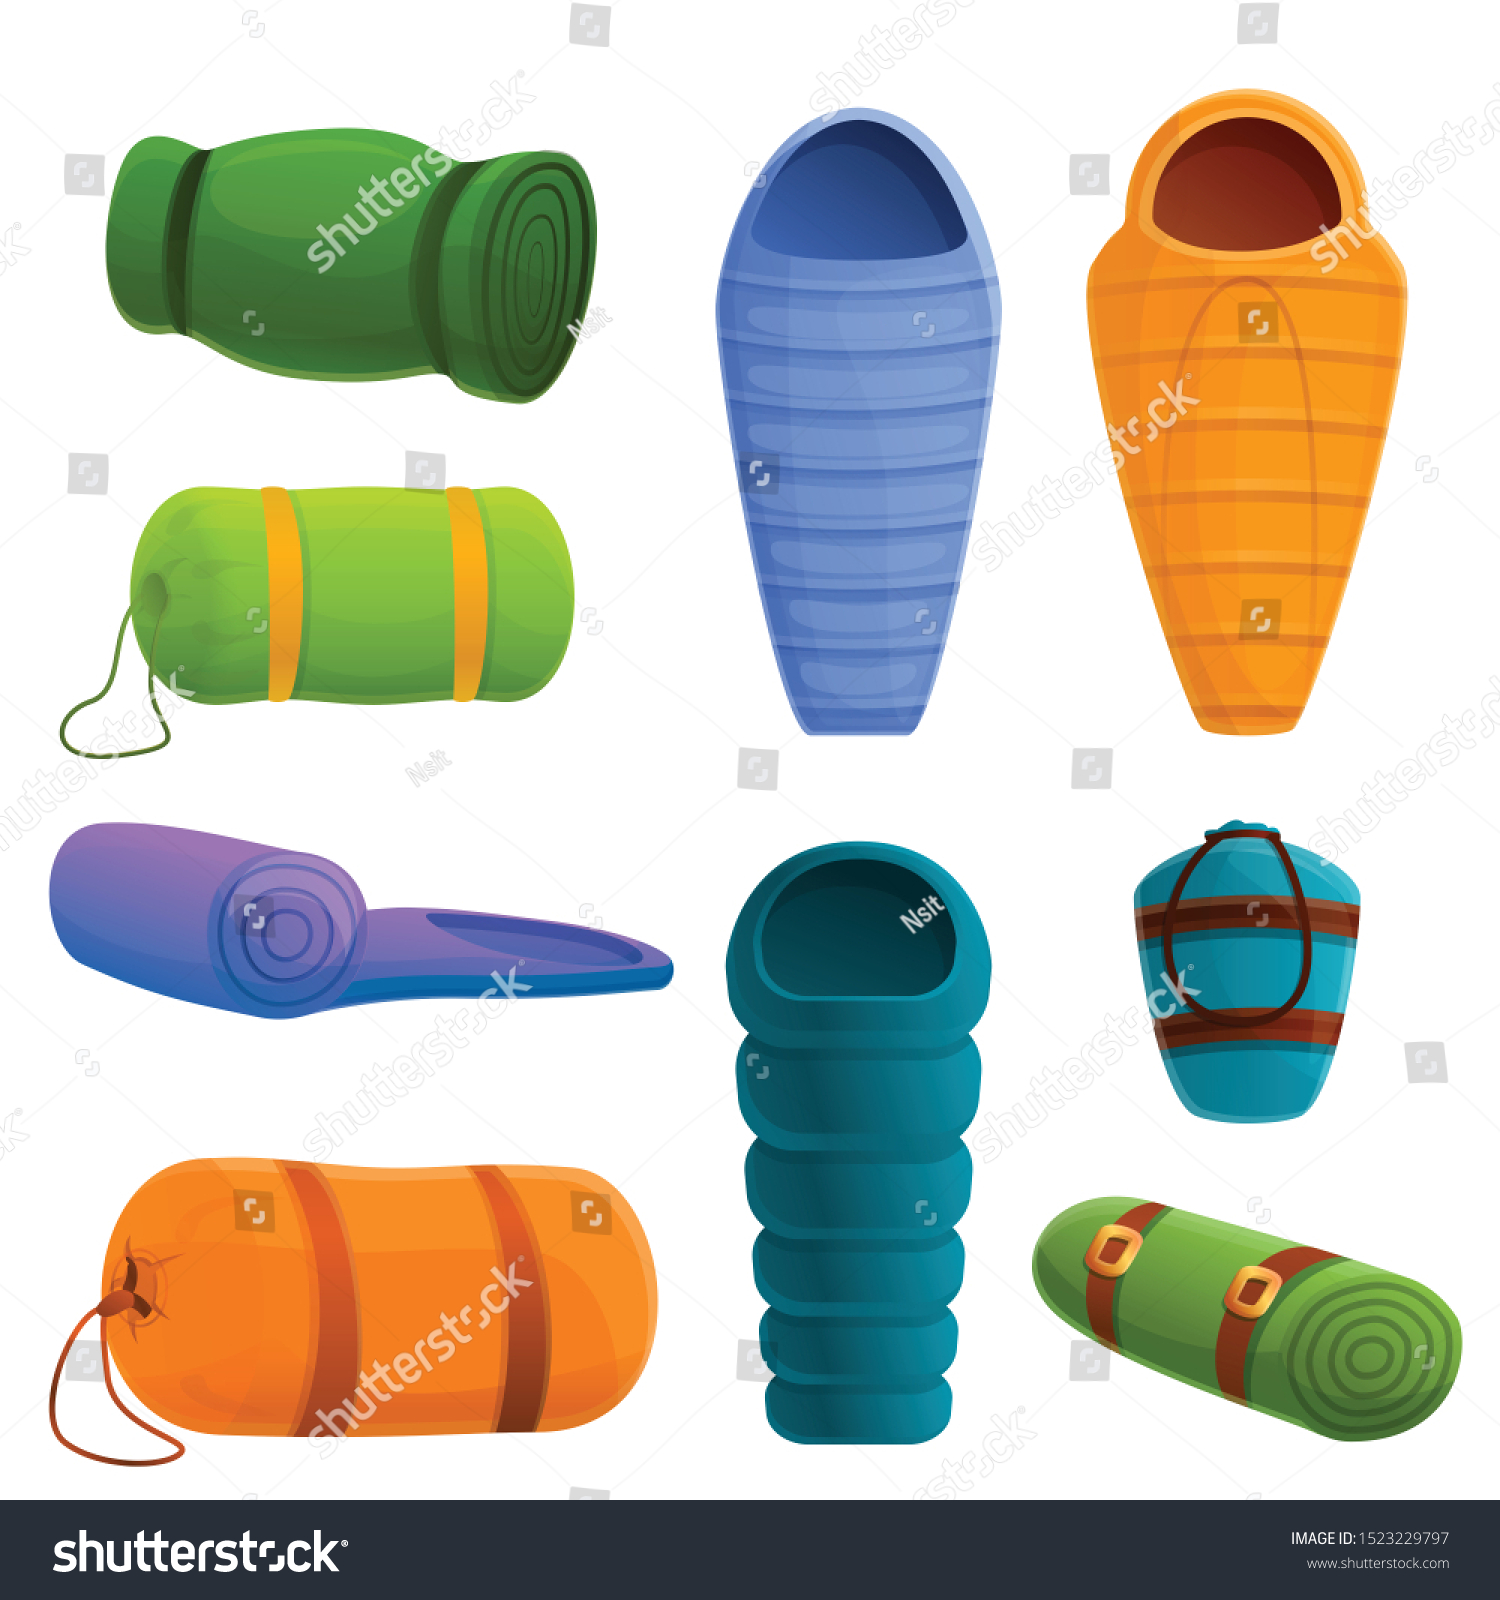 10 Best cheap sleeping bags for spring,summer and fall reviews & buyer ...